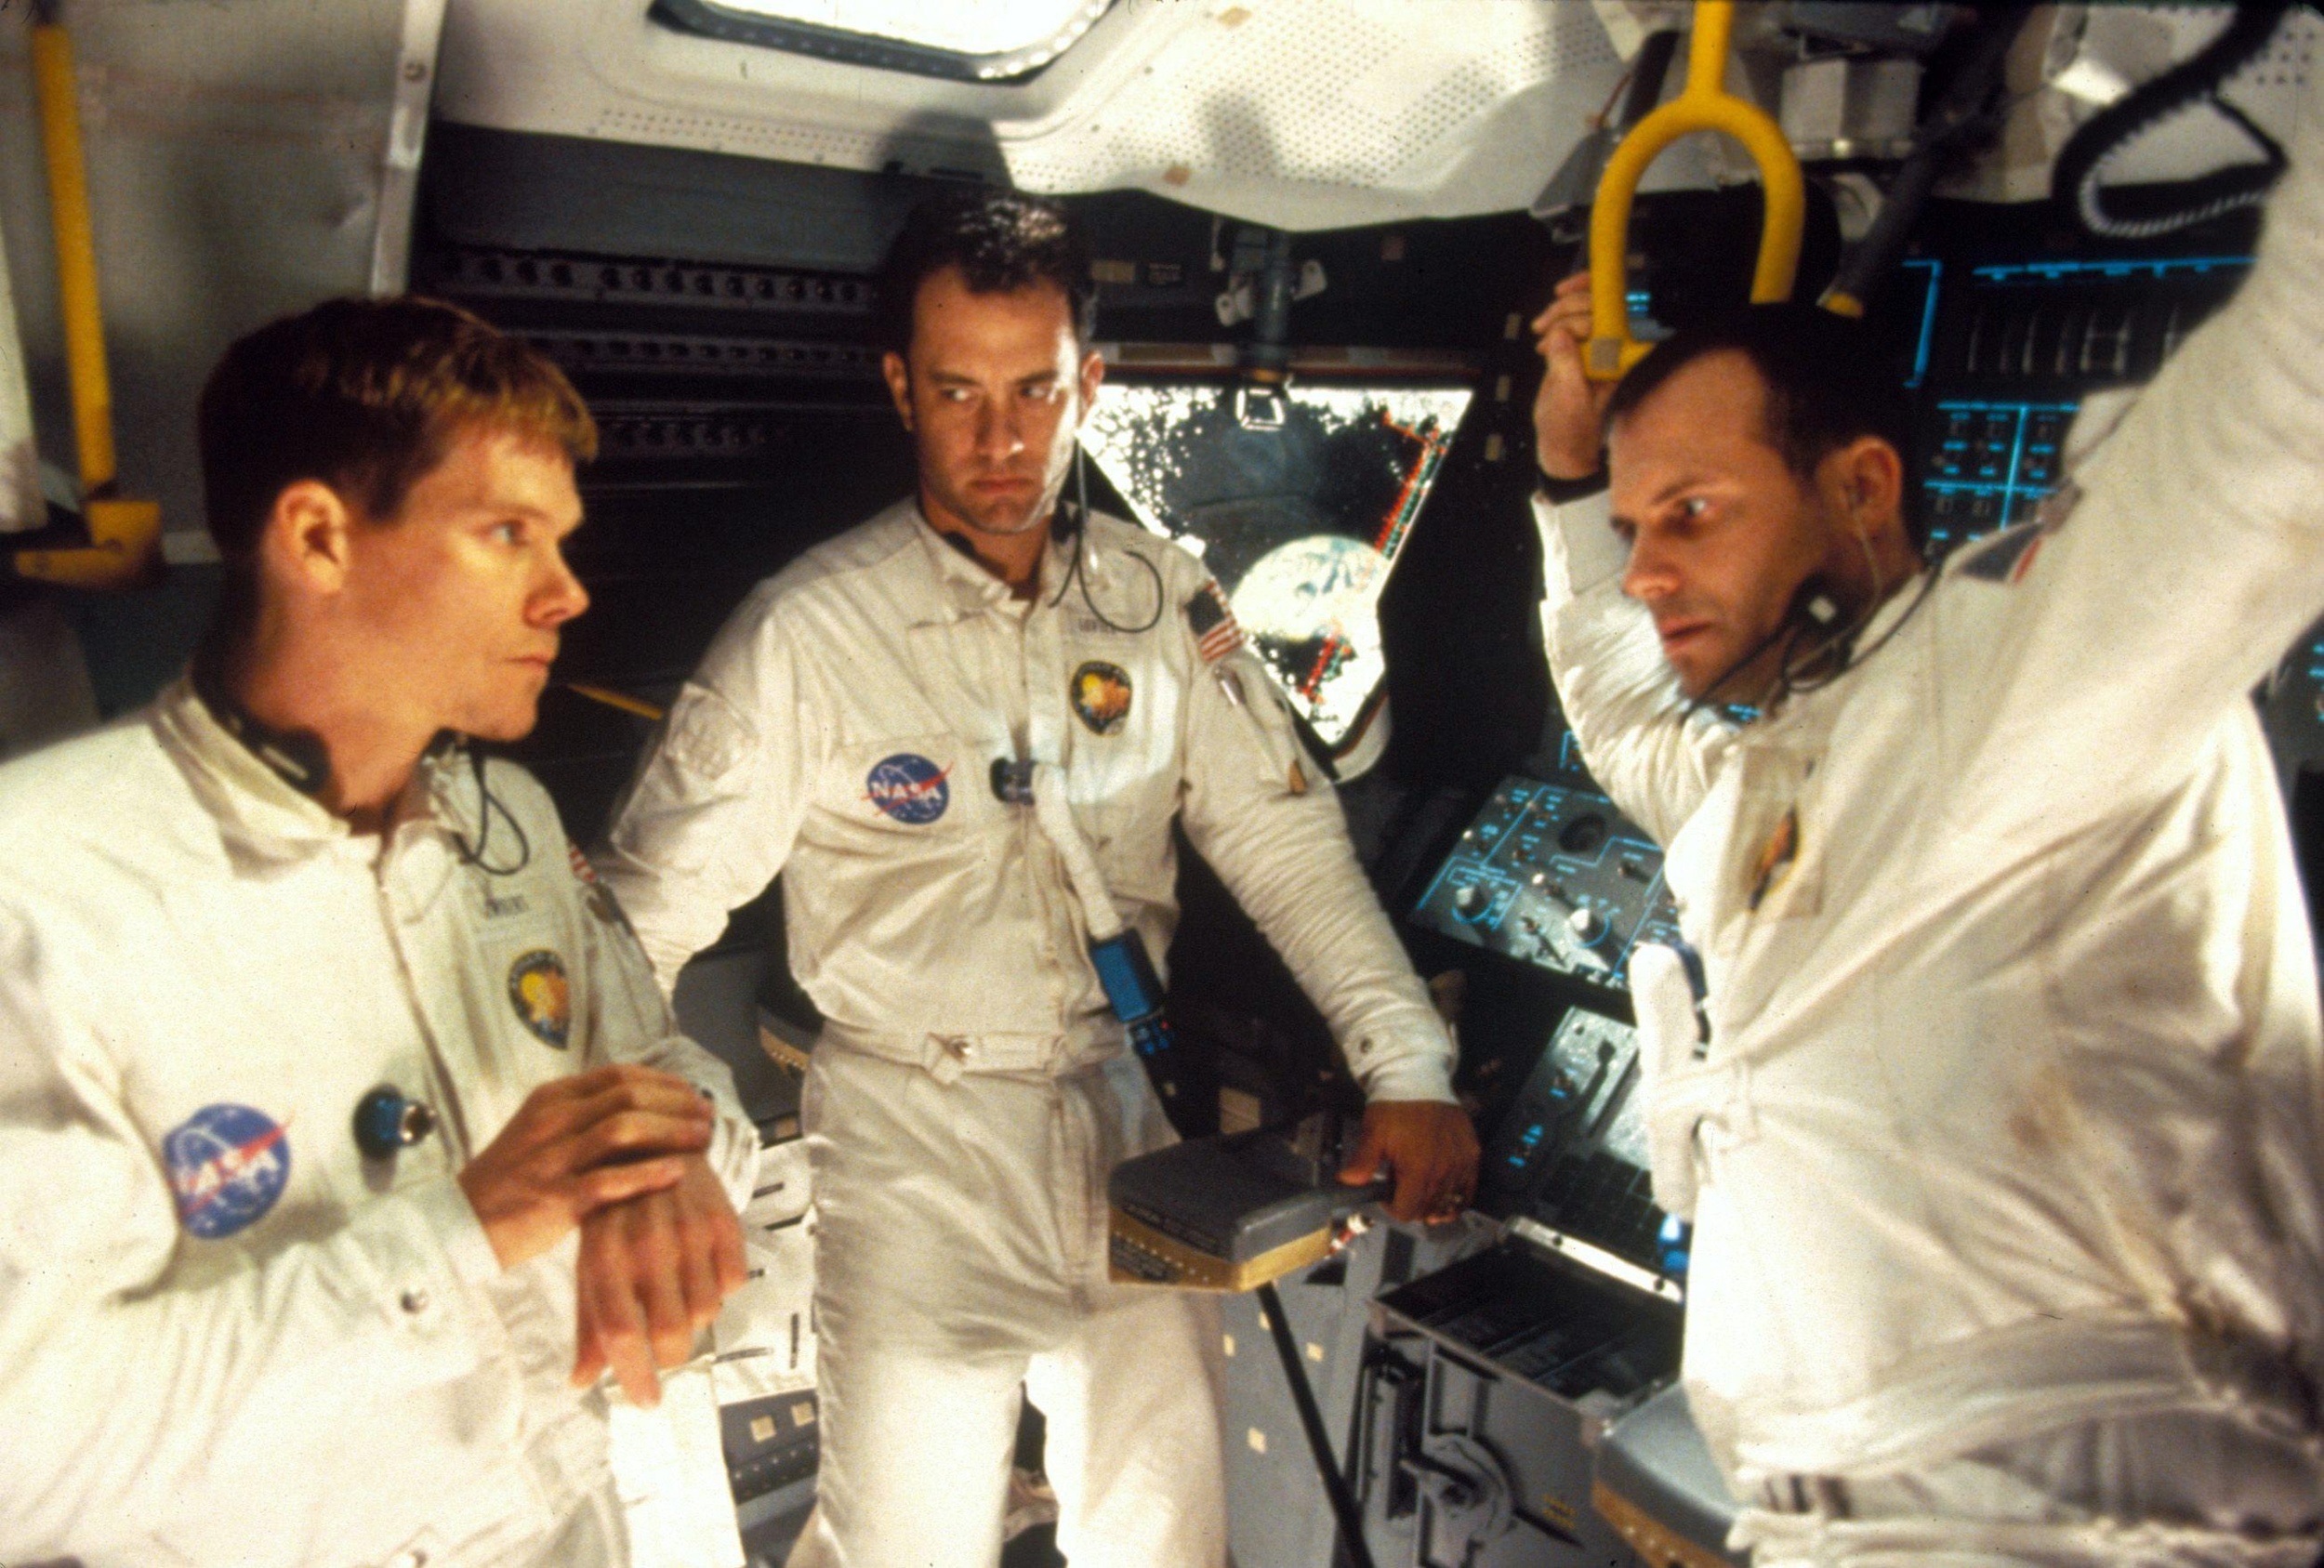 <p>The power of cinema is largely in its ability to transport viewers out of their limited experiences and into the world of the fantastic. This is true even in a film like <span><em>Apollo 13</em>, </span>which is based on the true story of an aborted moon landing and the efforts of NASA to rescue the astronauts. It perfectly combines a competent director (Ron Howard) and stellar performances (including from such giants as Tom Hanks and Kevin Bacon). What’s more, it is also surprisingly accurate, reflecting <a href="https://www.looper.com/337566/is-the-apollo-13-movie-accurate-to-the-true-story/#:~:text=NASA%20planetary%20scientist%20Rick%20Elphic,travel%22%20(via%20Time)."><span>many of the realities faced by the men</span></a> as they struggled to survive in space.</p><p><a href='https://www.msn.com/en-us/community/channel/vid-cj9pqbr0vn9in2b6ddcd8sfgpfq6x6utp44fssrv6mc2gtybw0us'>Follow us on MSN to see more of our exclusive entertainment content.</a></p>